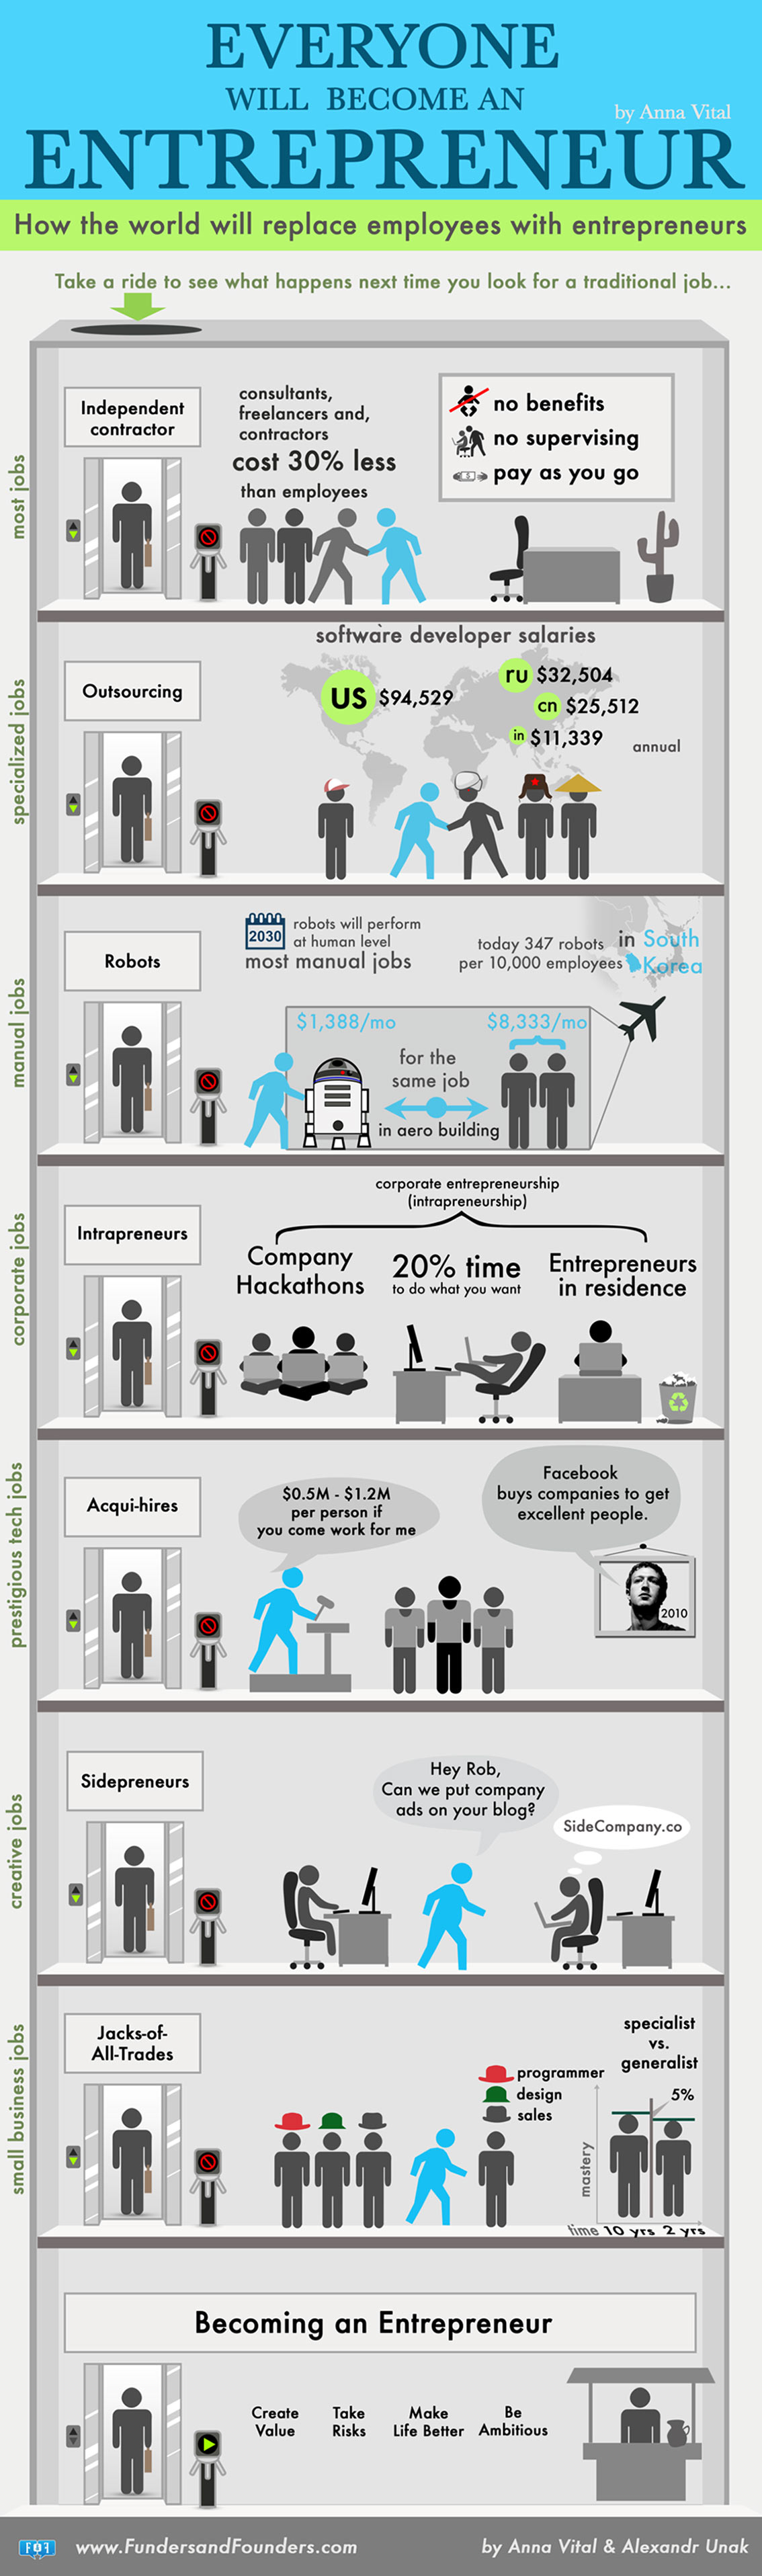 How the World Will Replace Employees with Entrepreneurs Infographic